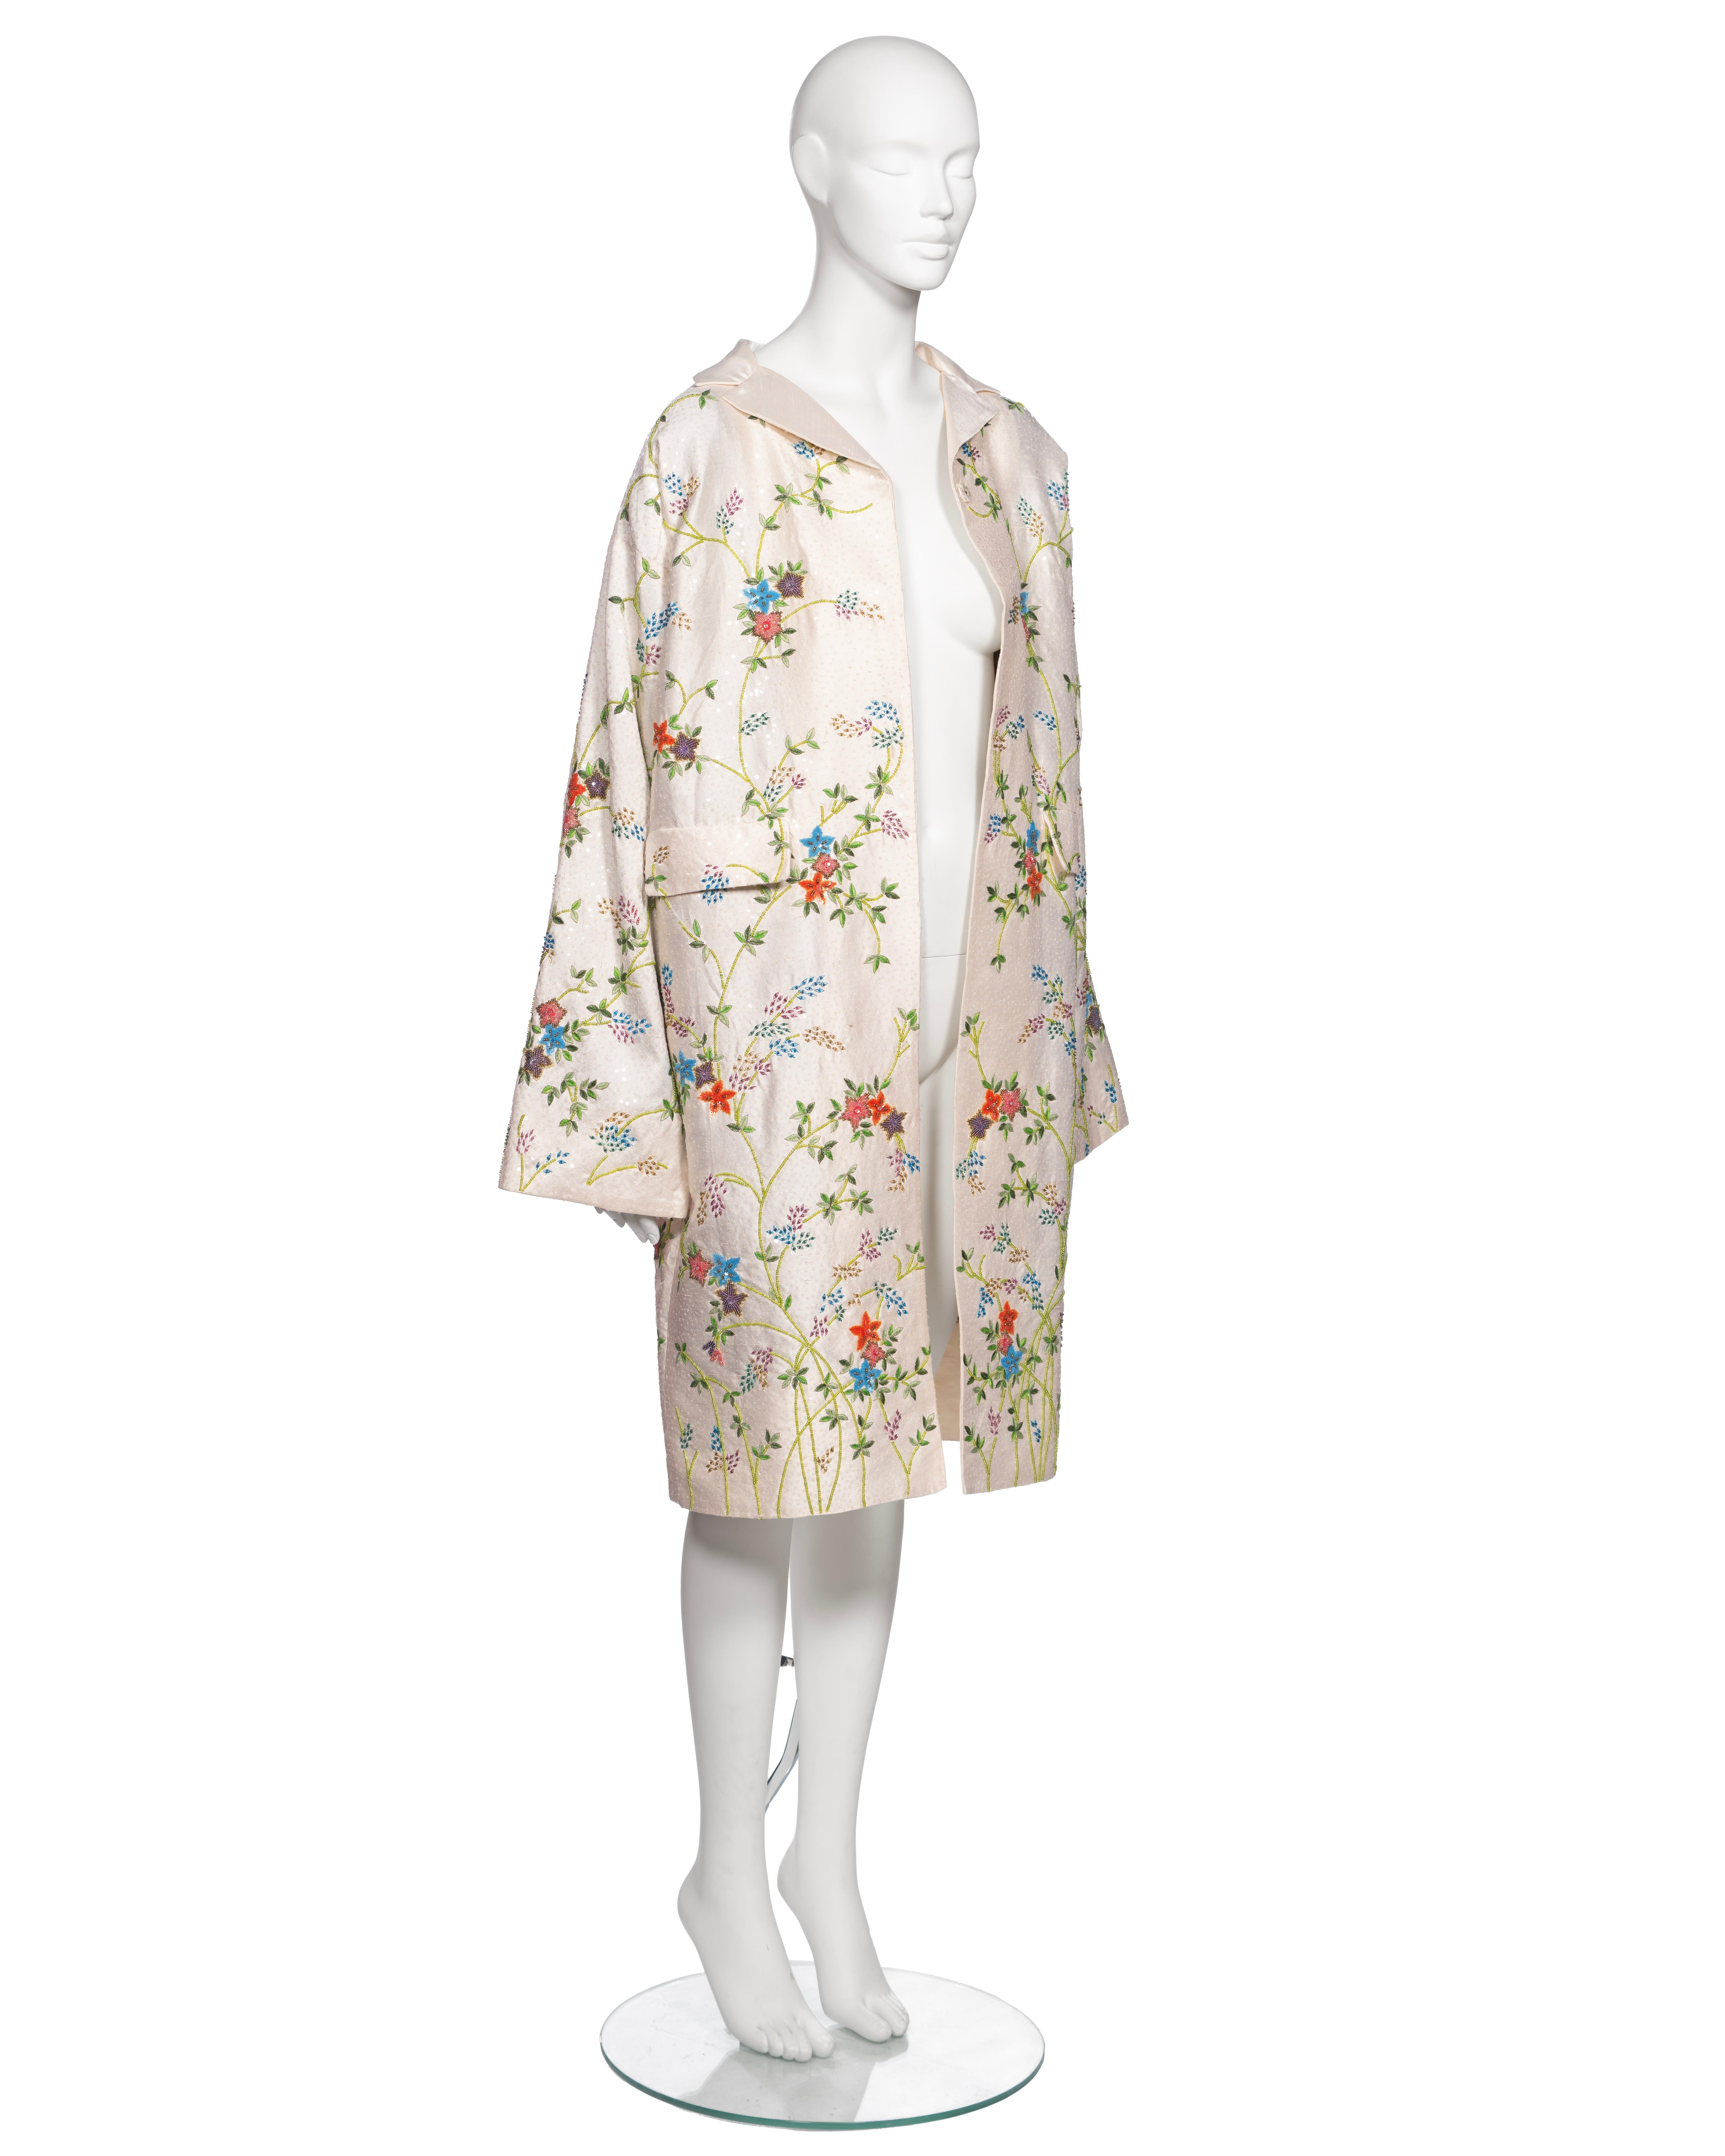 Dolce & Gabbana Hand-Embroidered White Raw Silk Evening Couture Coat, ss 1997 For Sale 7